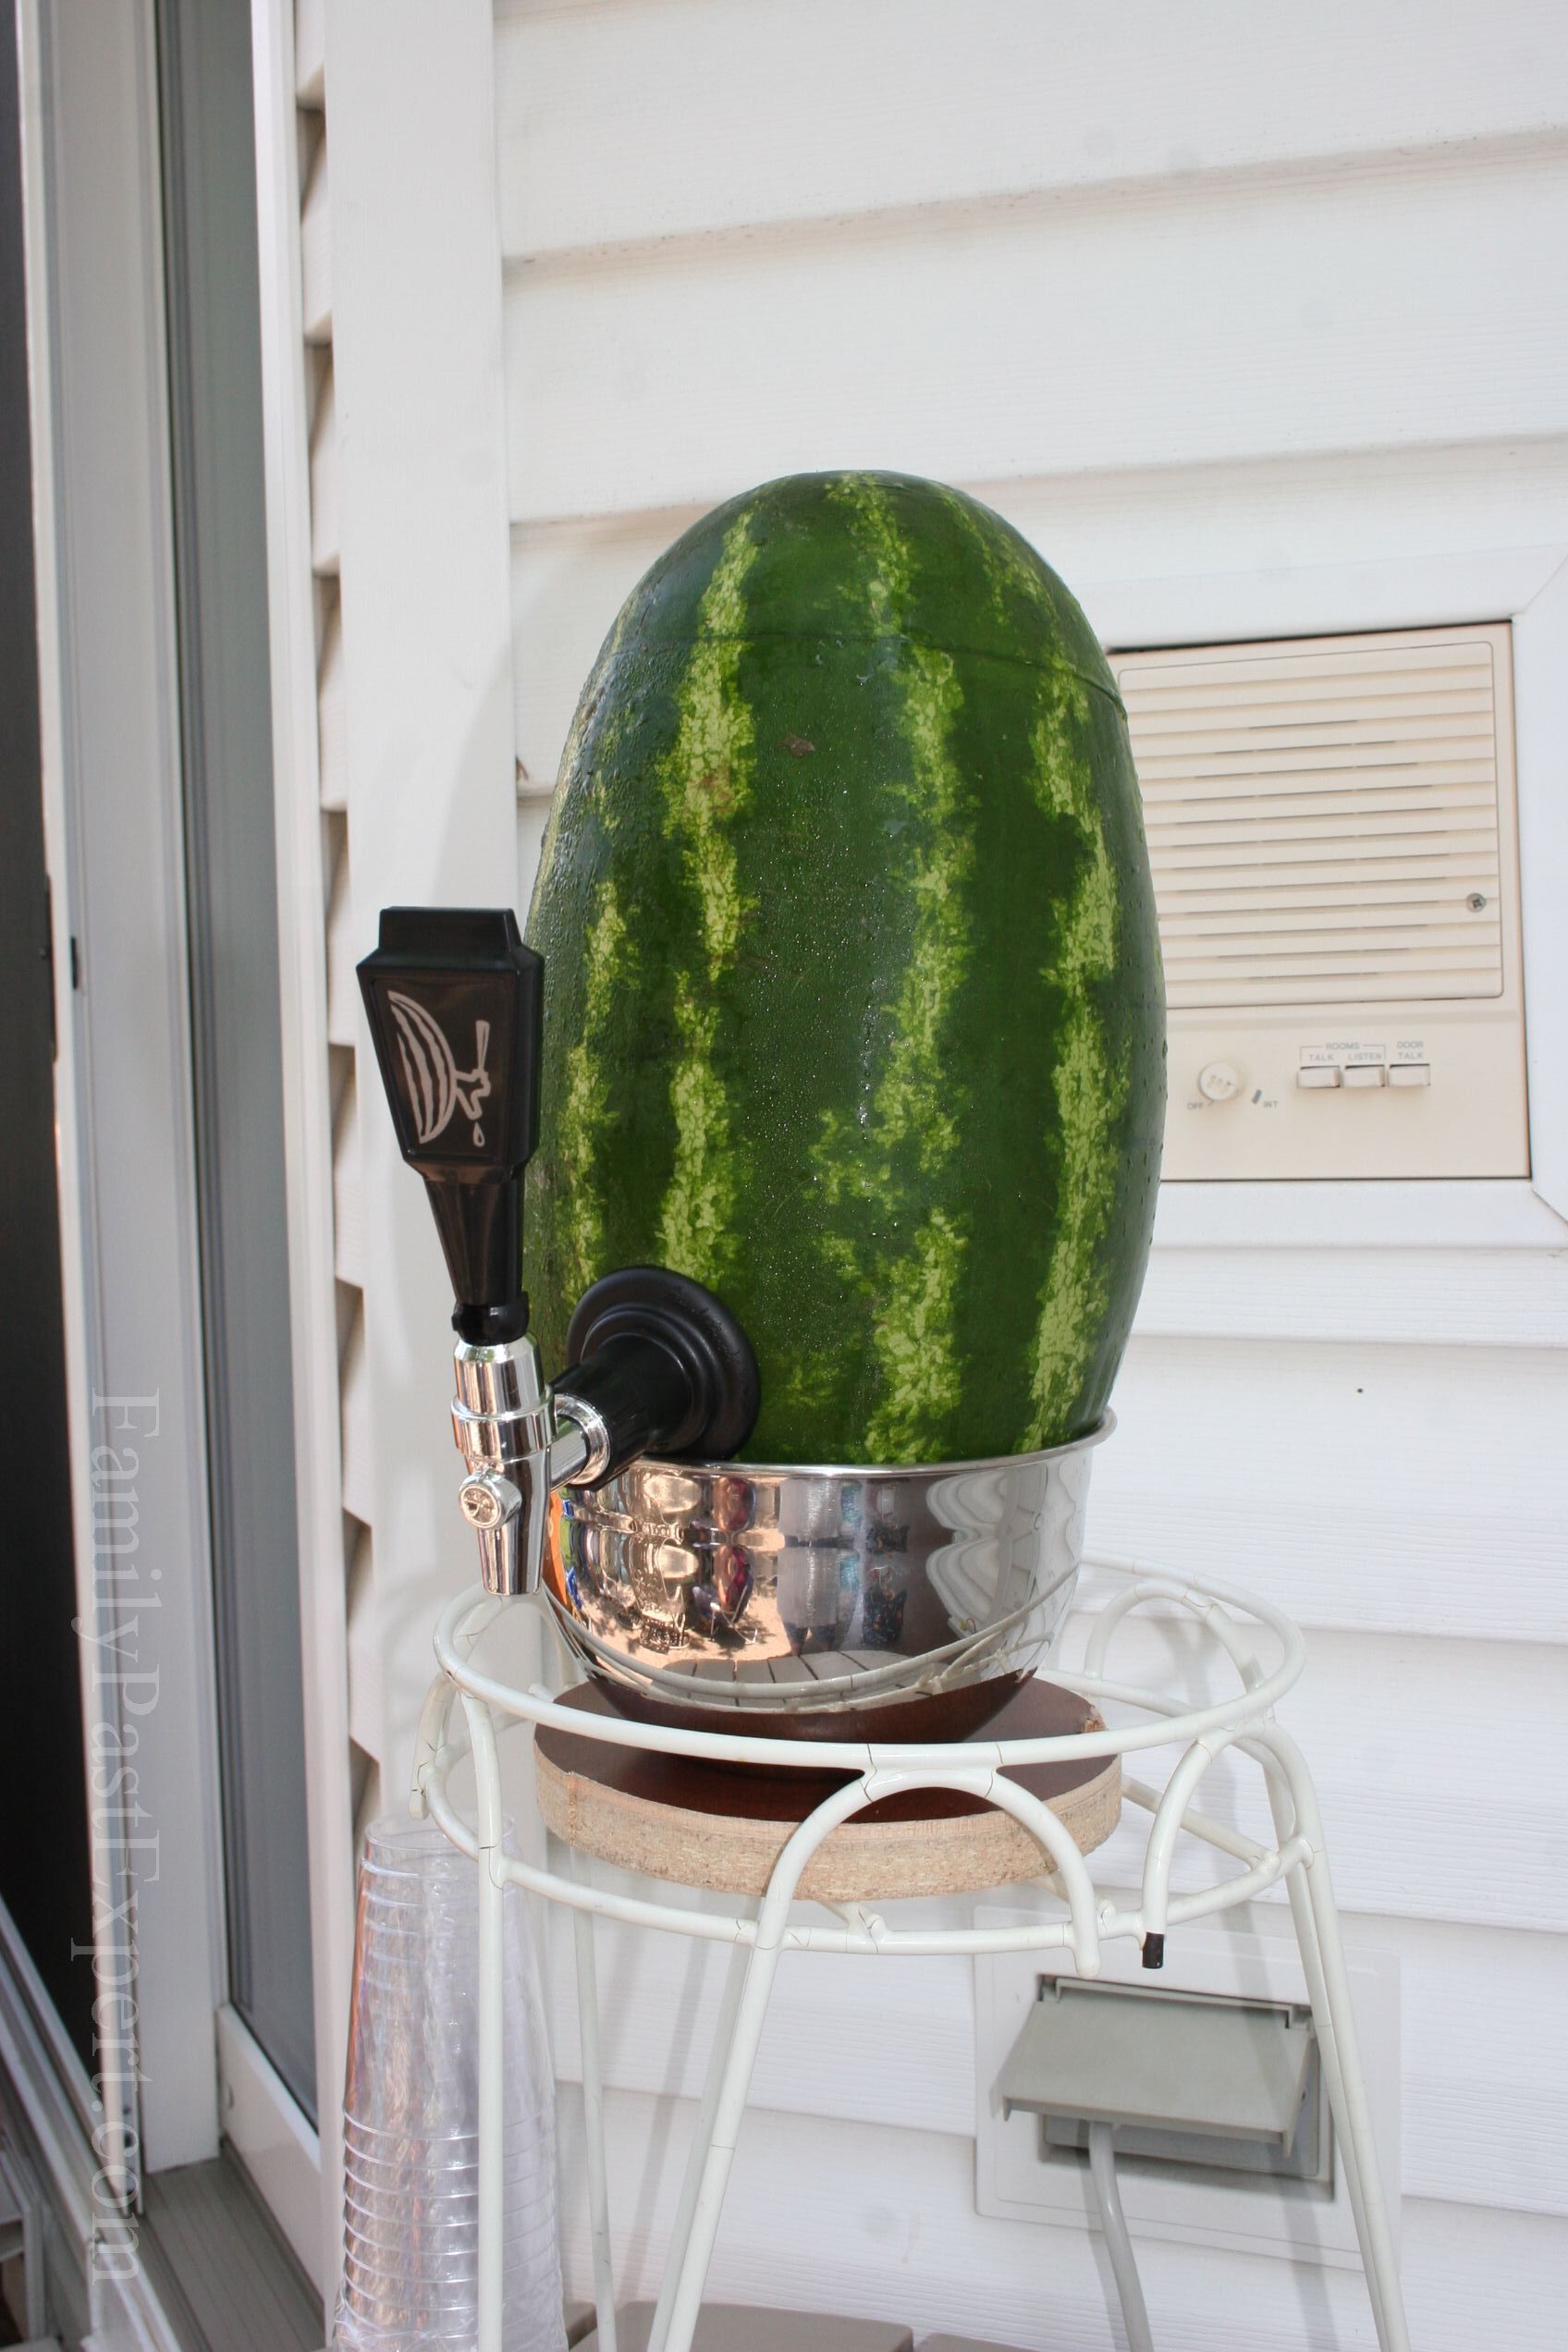 Watermelon Keg – past and present